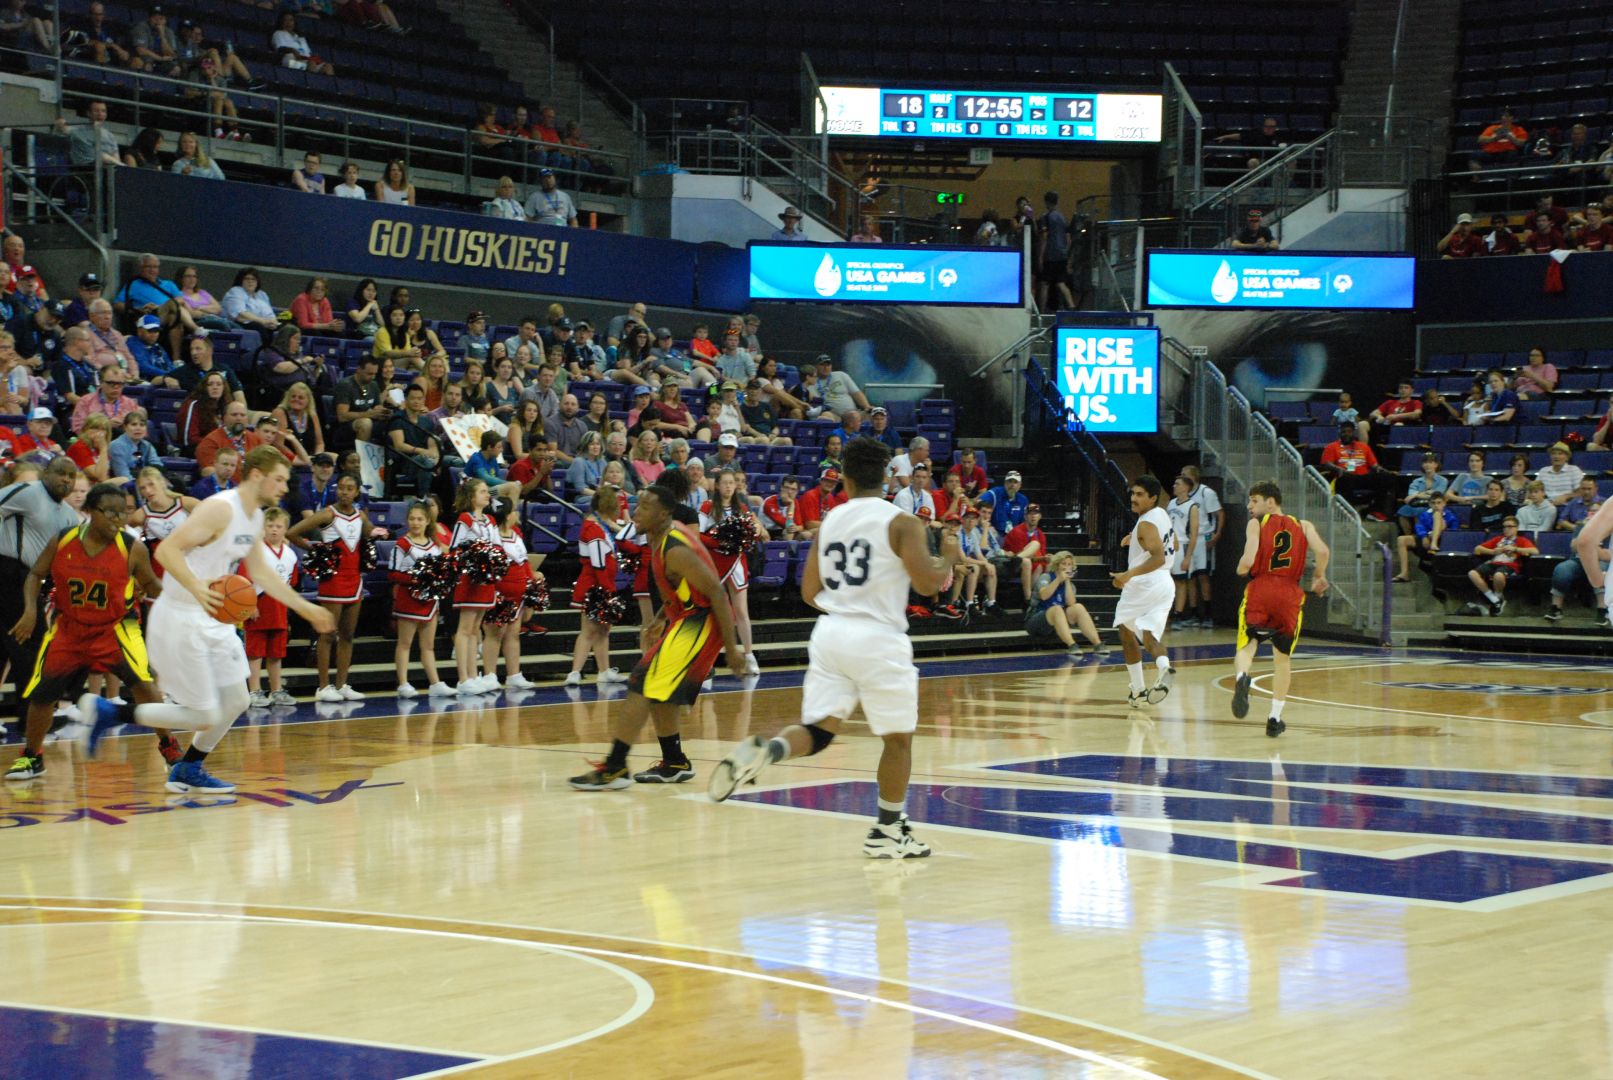 Micah Gumness dribbles the ball down court in the championship game against Maryland